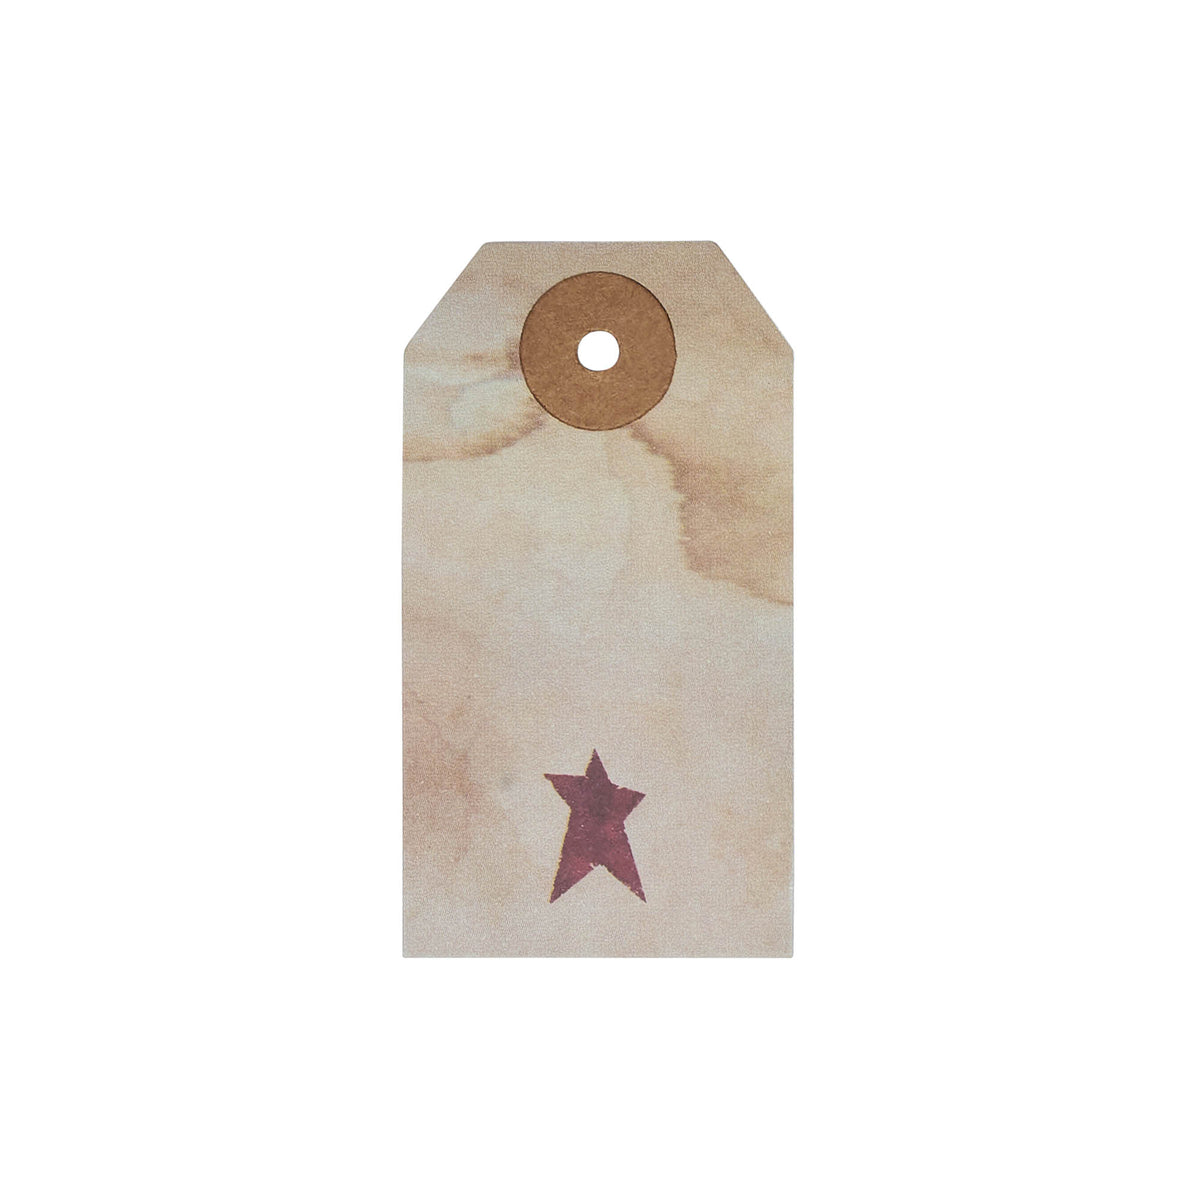 Primitive Star Tea Stained Paper Tag Burgundy 2.75x1.5 w/ Twine Set of 50